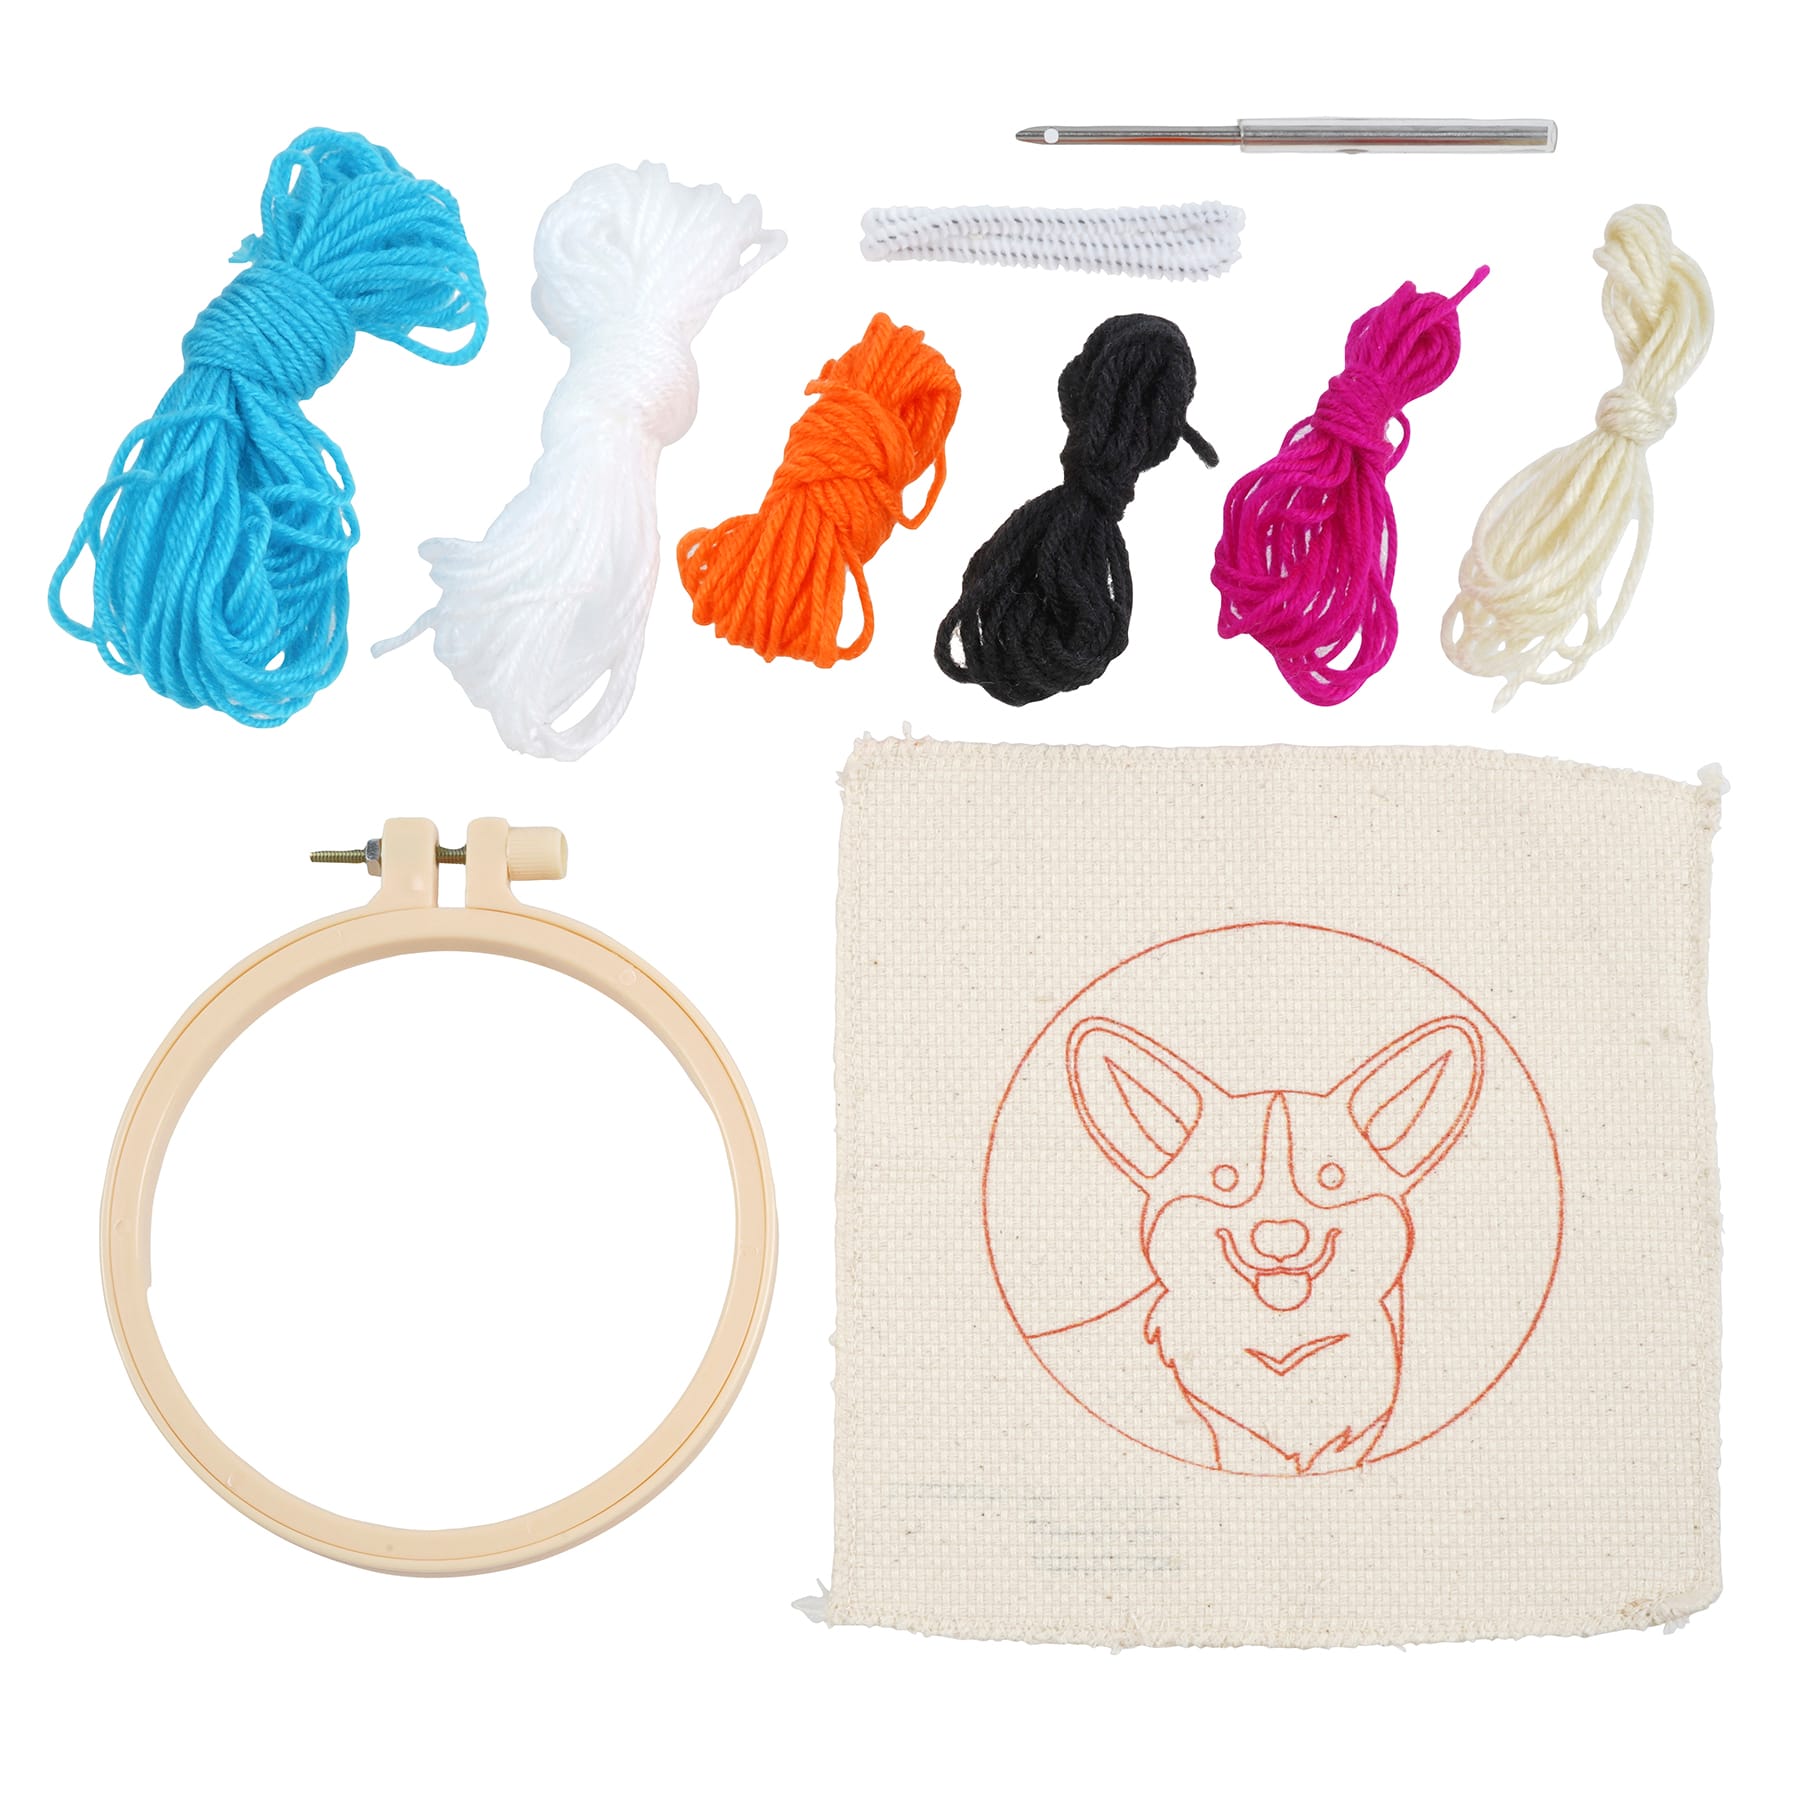 Dog Punch Needle Kits, Punch Needle Beginner Kit, Embroidery Supplies for  Different Dog Pattern 